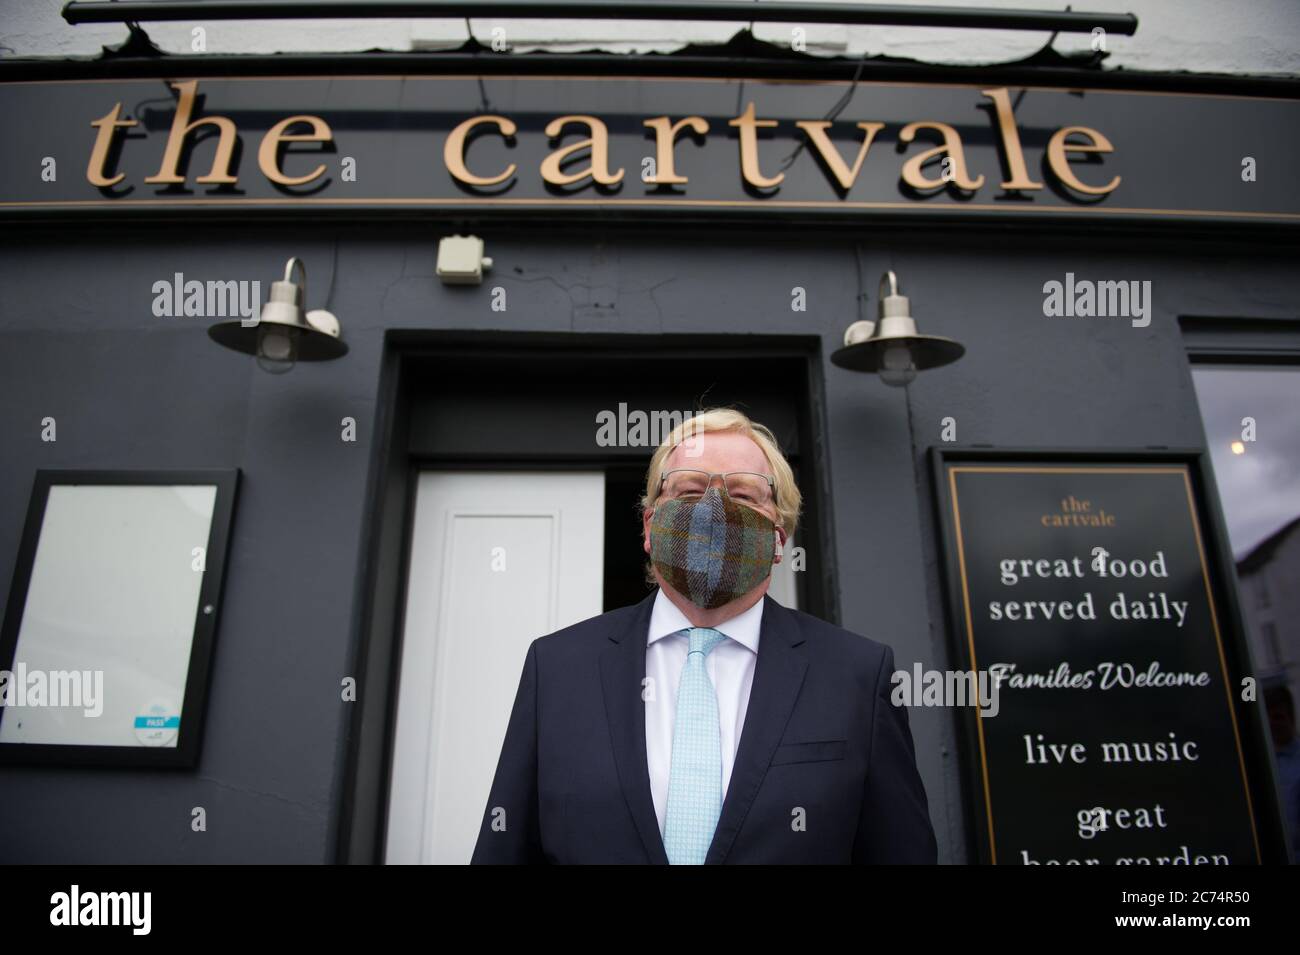 Glasgow, Scotland, UK. 14th July, 2020. Pictured: Jackson Carlaw MSP - Leader of the Scottish Conservative and Unionist Party. Jackson Carlaw visits a restaurant in Clarkston tomorrow ahead of the full reopening of the hospitality industry in Scotland, as he urges Scots to shop, drink and eat local. Credit: Colin Fisher/Alamy Live News Stock Photo